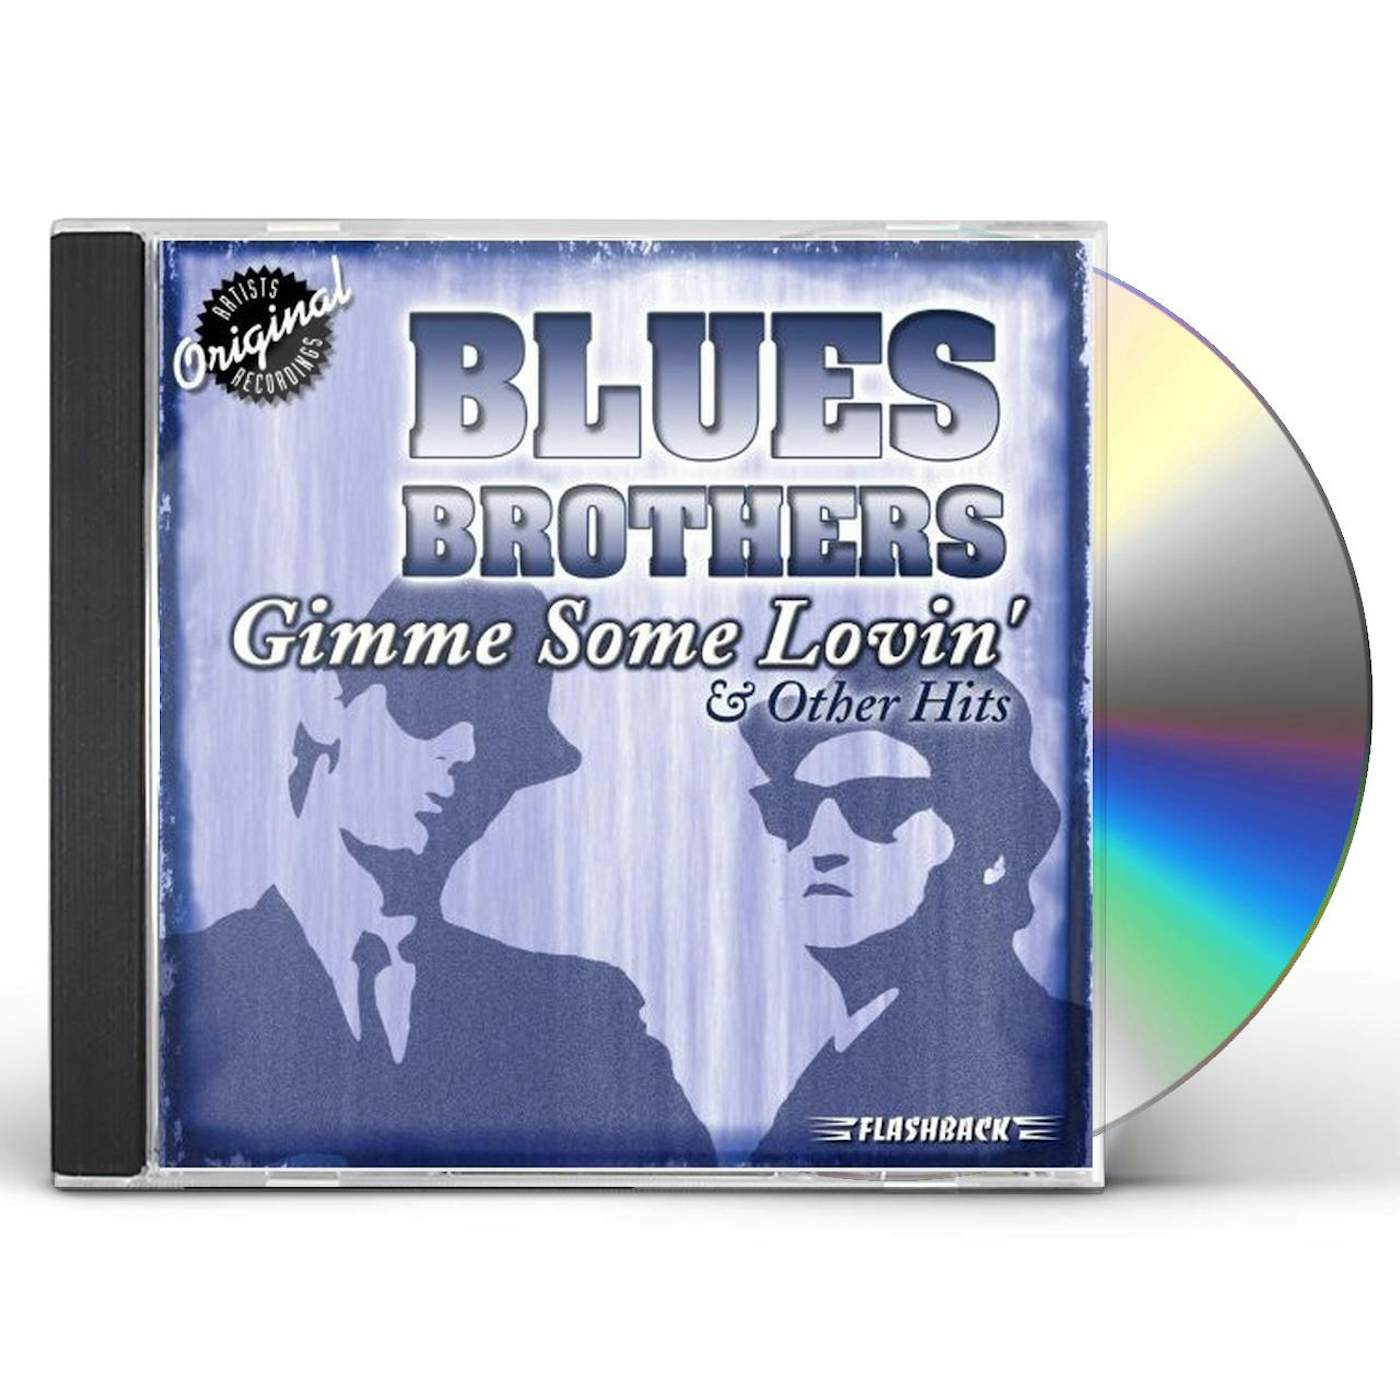 The Blues & Brothers GIMME SOME LOVIN & OTHER HITS CD